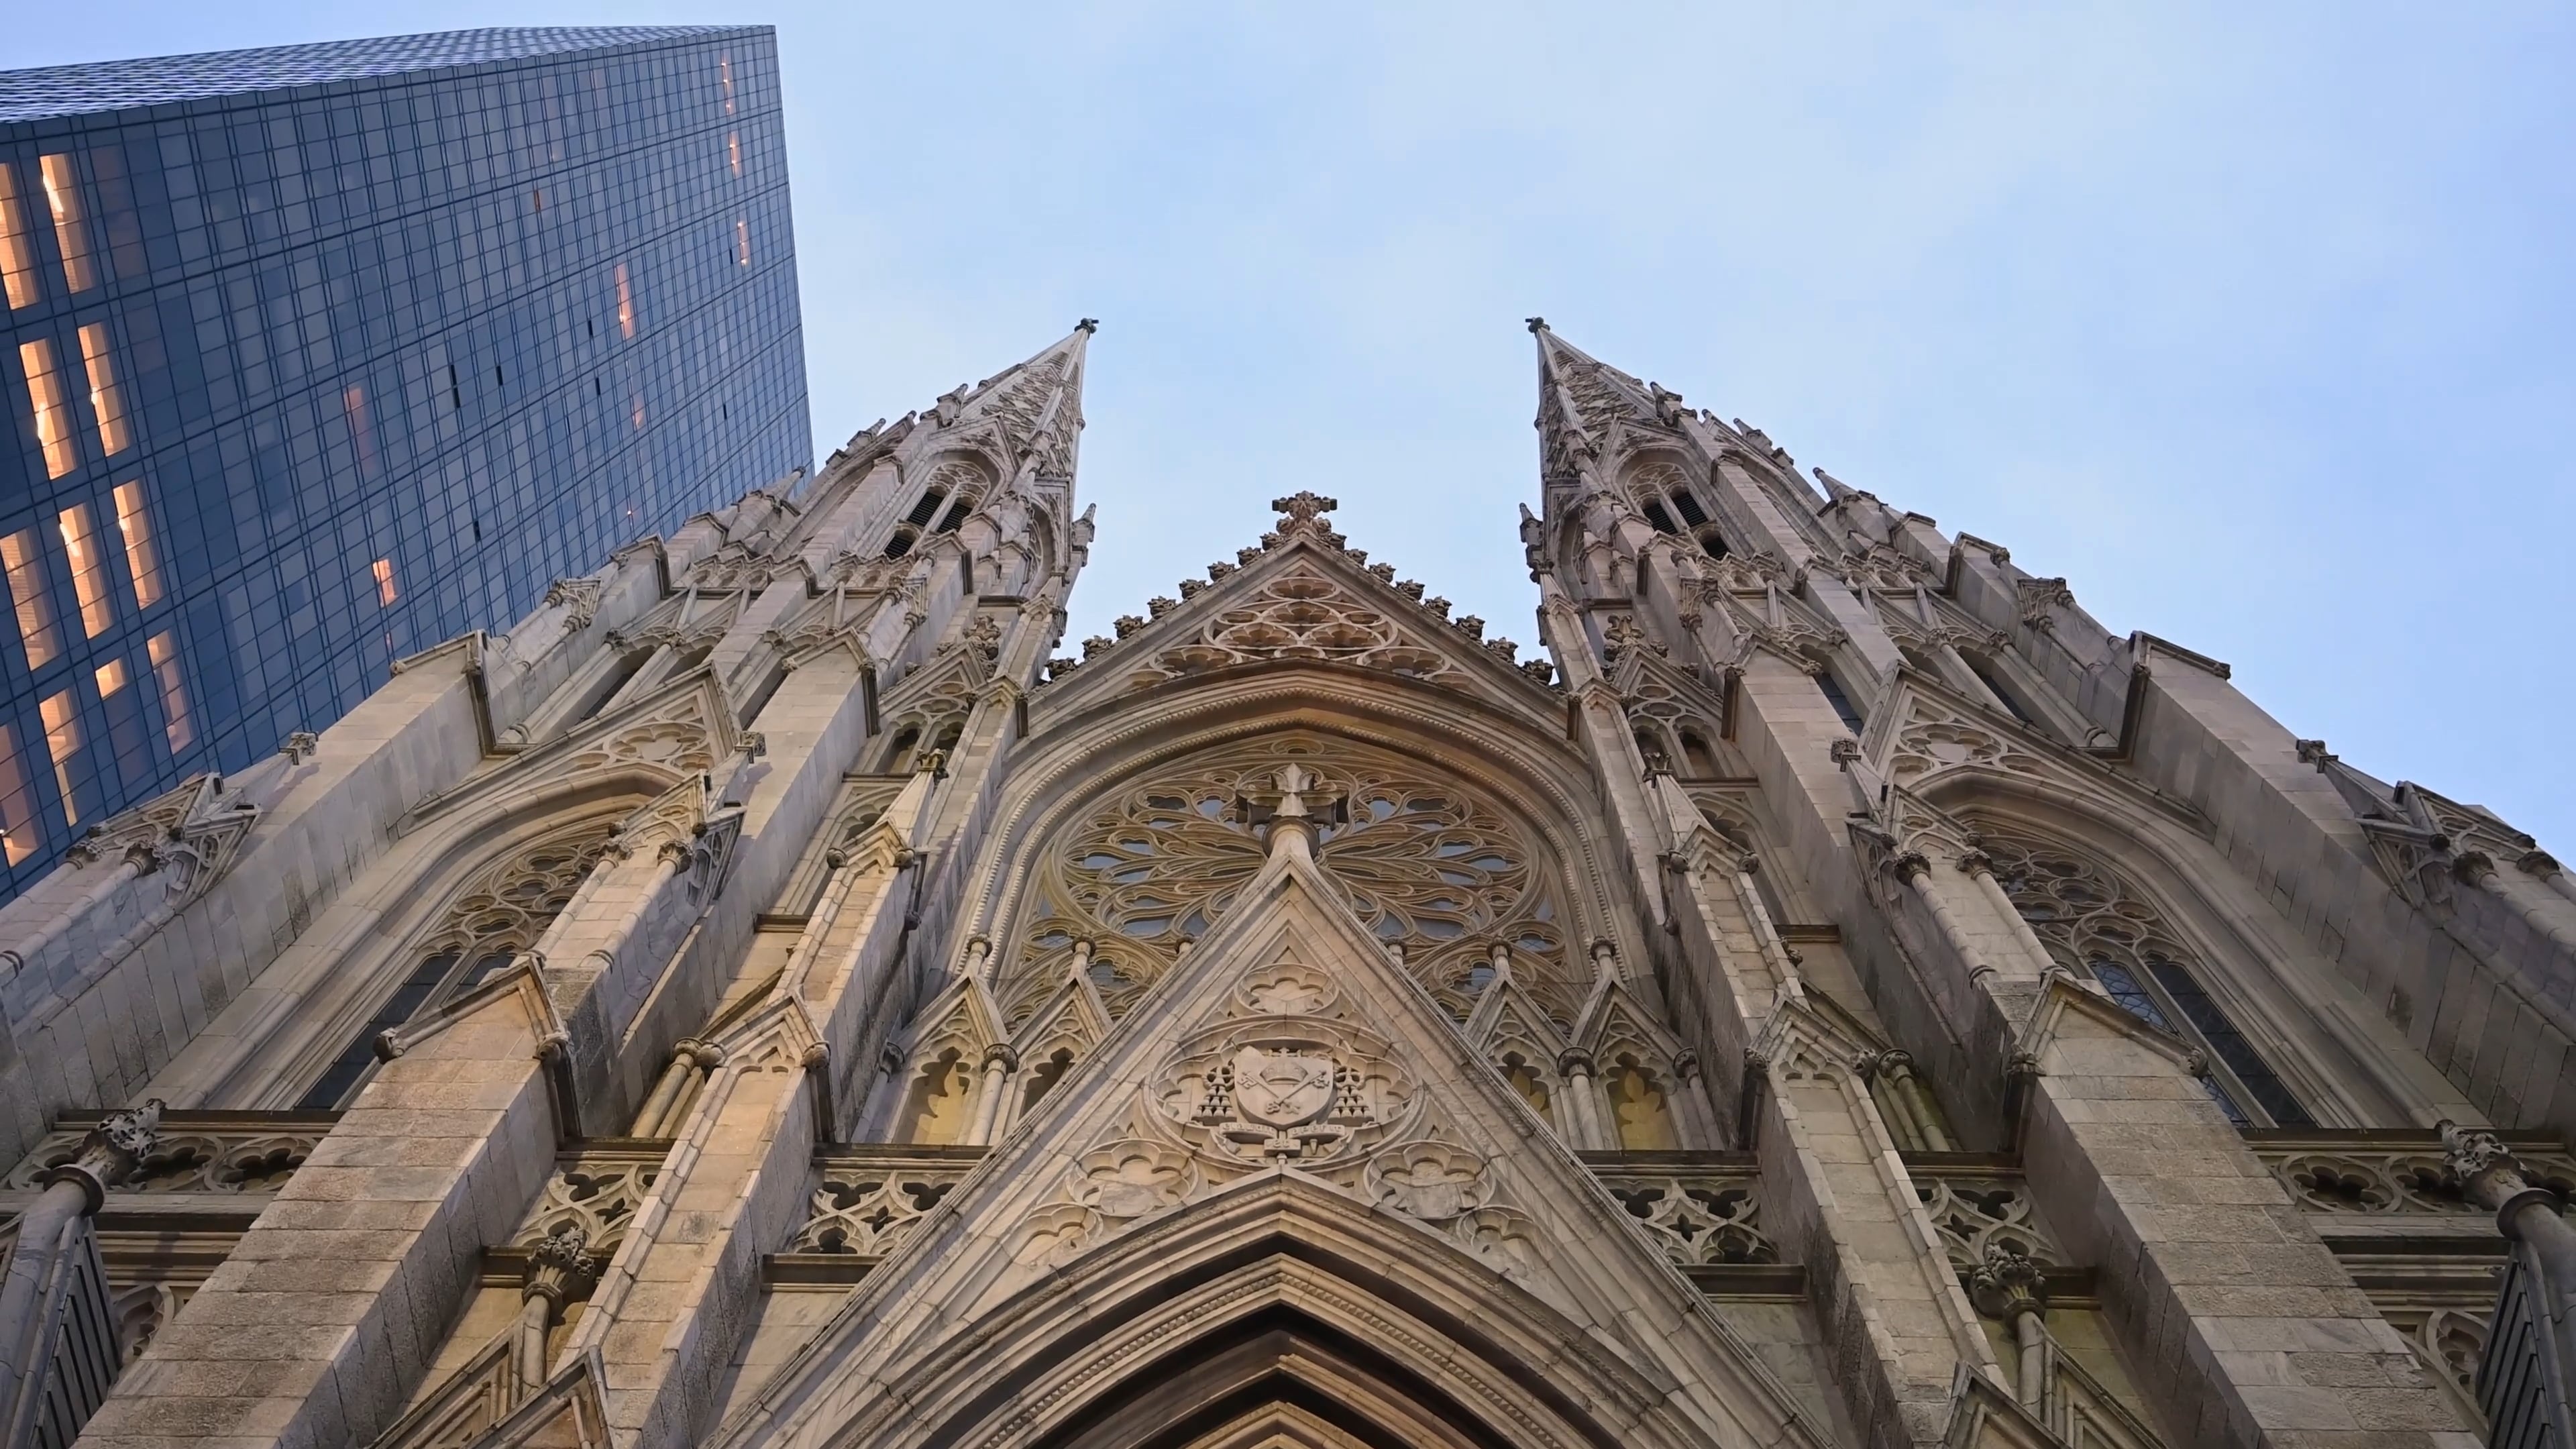 Gothic Architecture: Church, St. Patrick's Cathedral, New York, West front, Rose window, Towers, Spires. 3840x2160 4K Background.